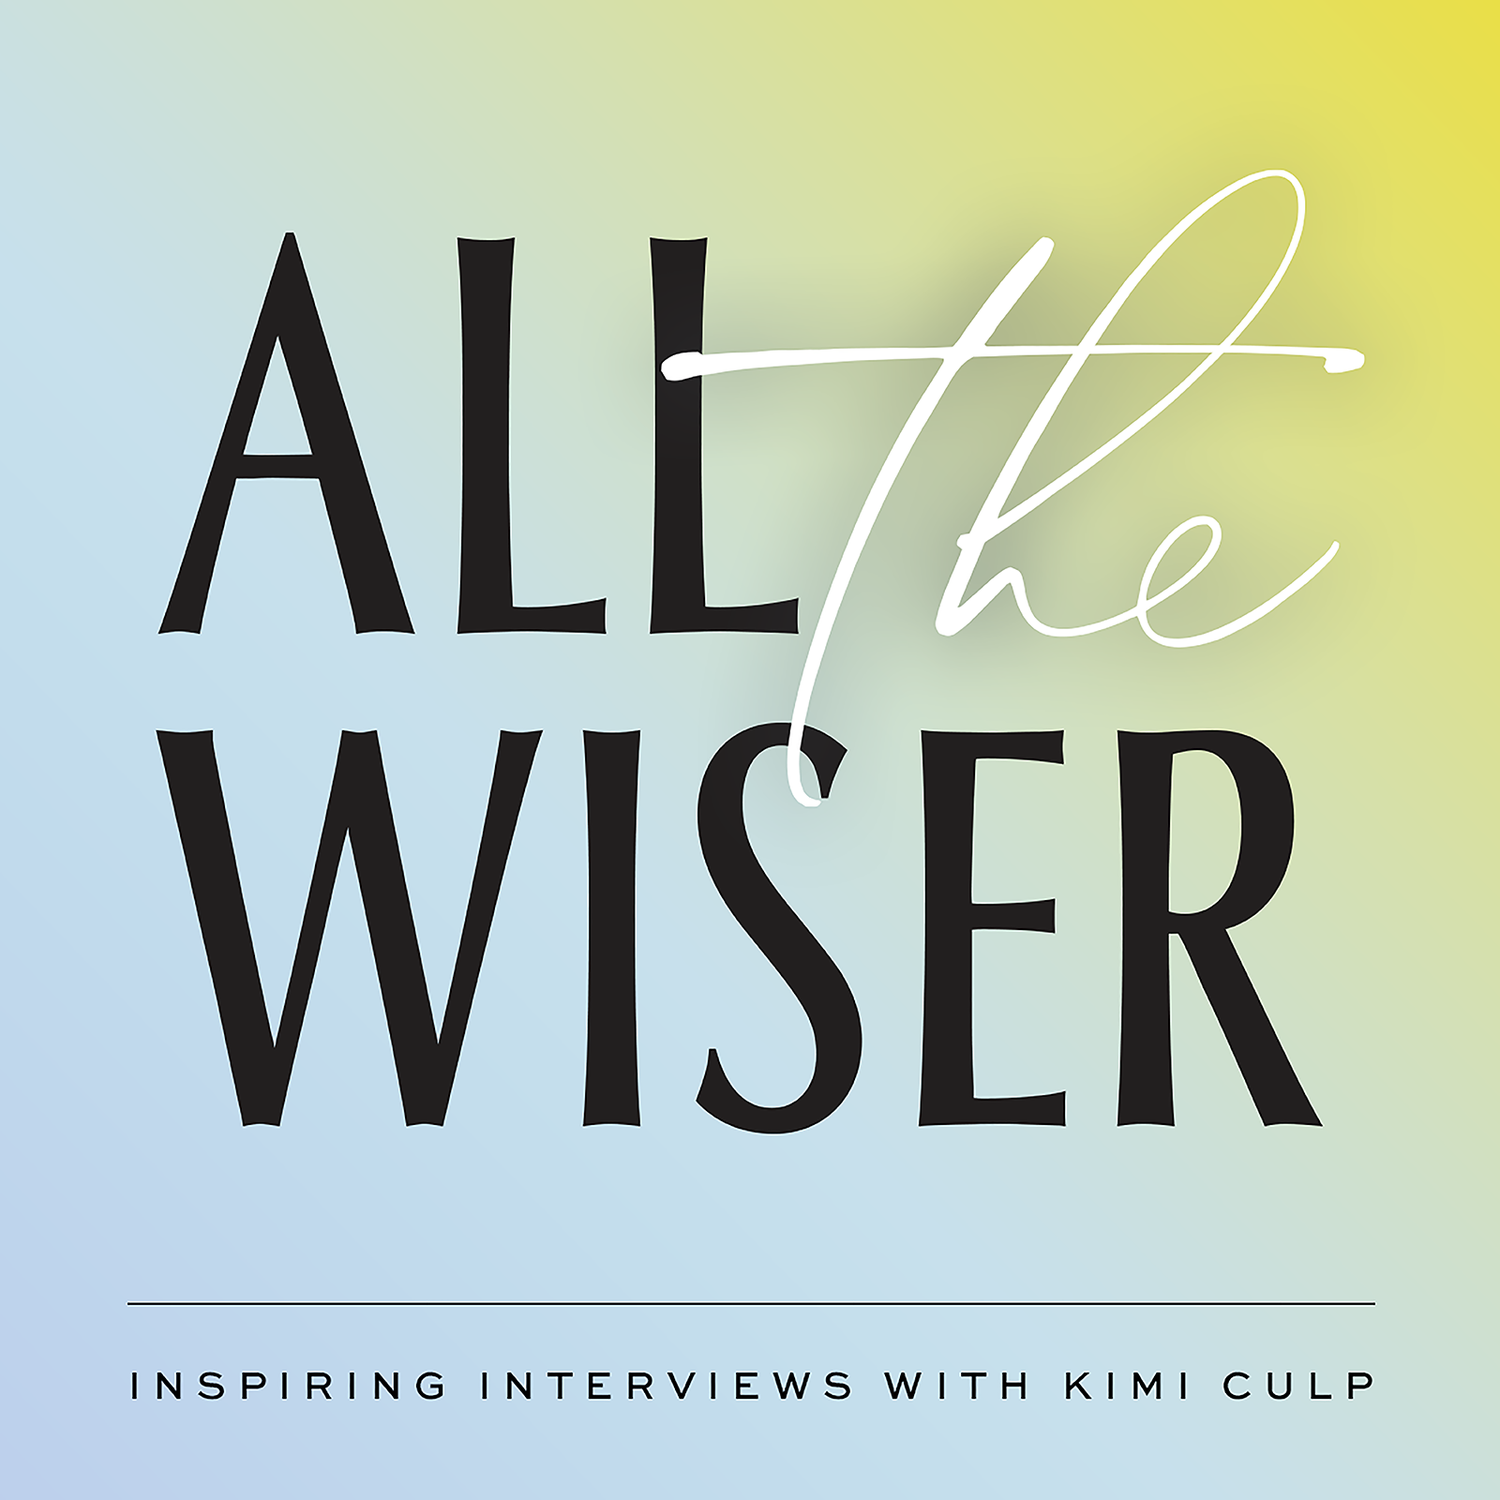 A Little Wiser: What makes belonging so important?